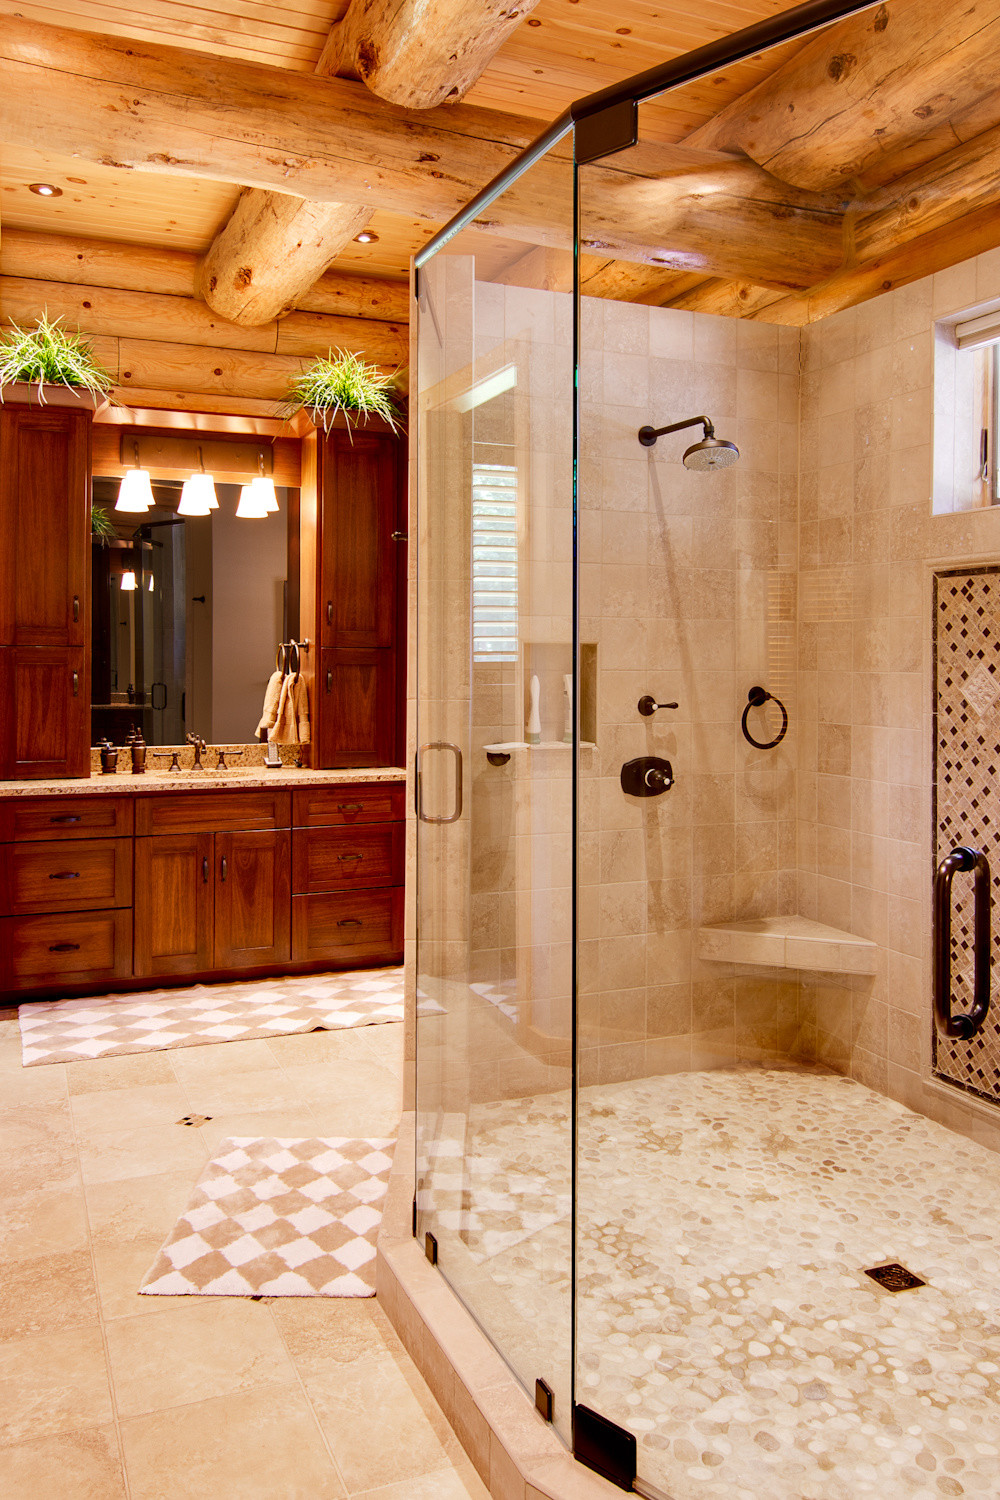 Supersized Walk-In Showers for New Log Homes or Renovations